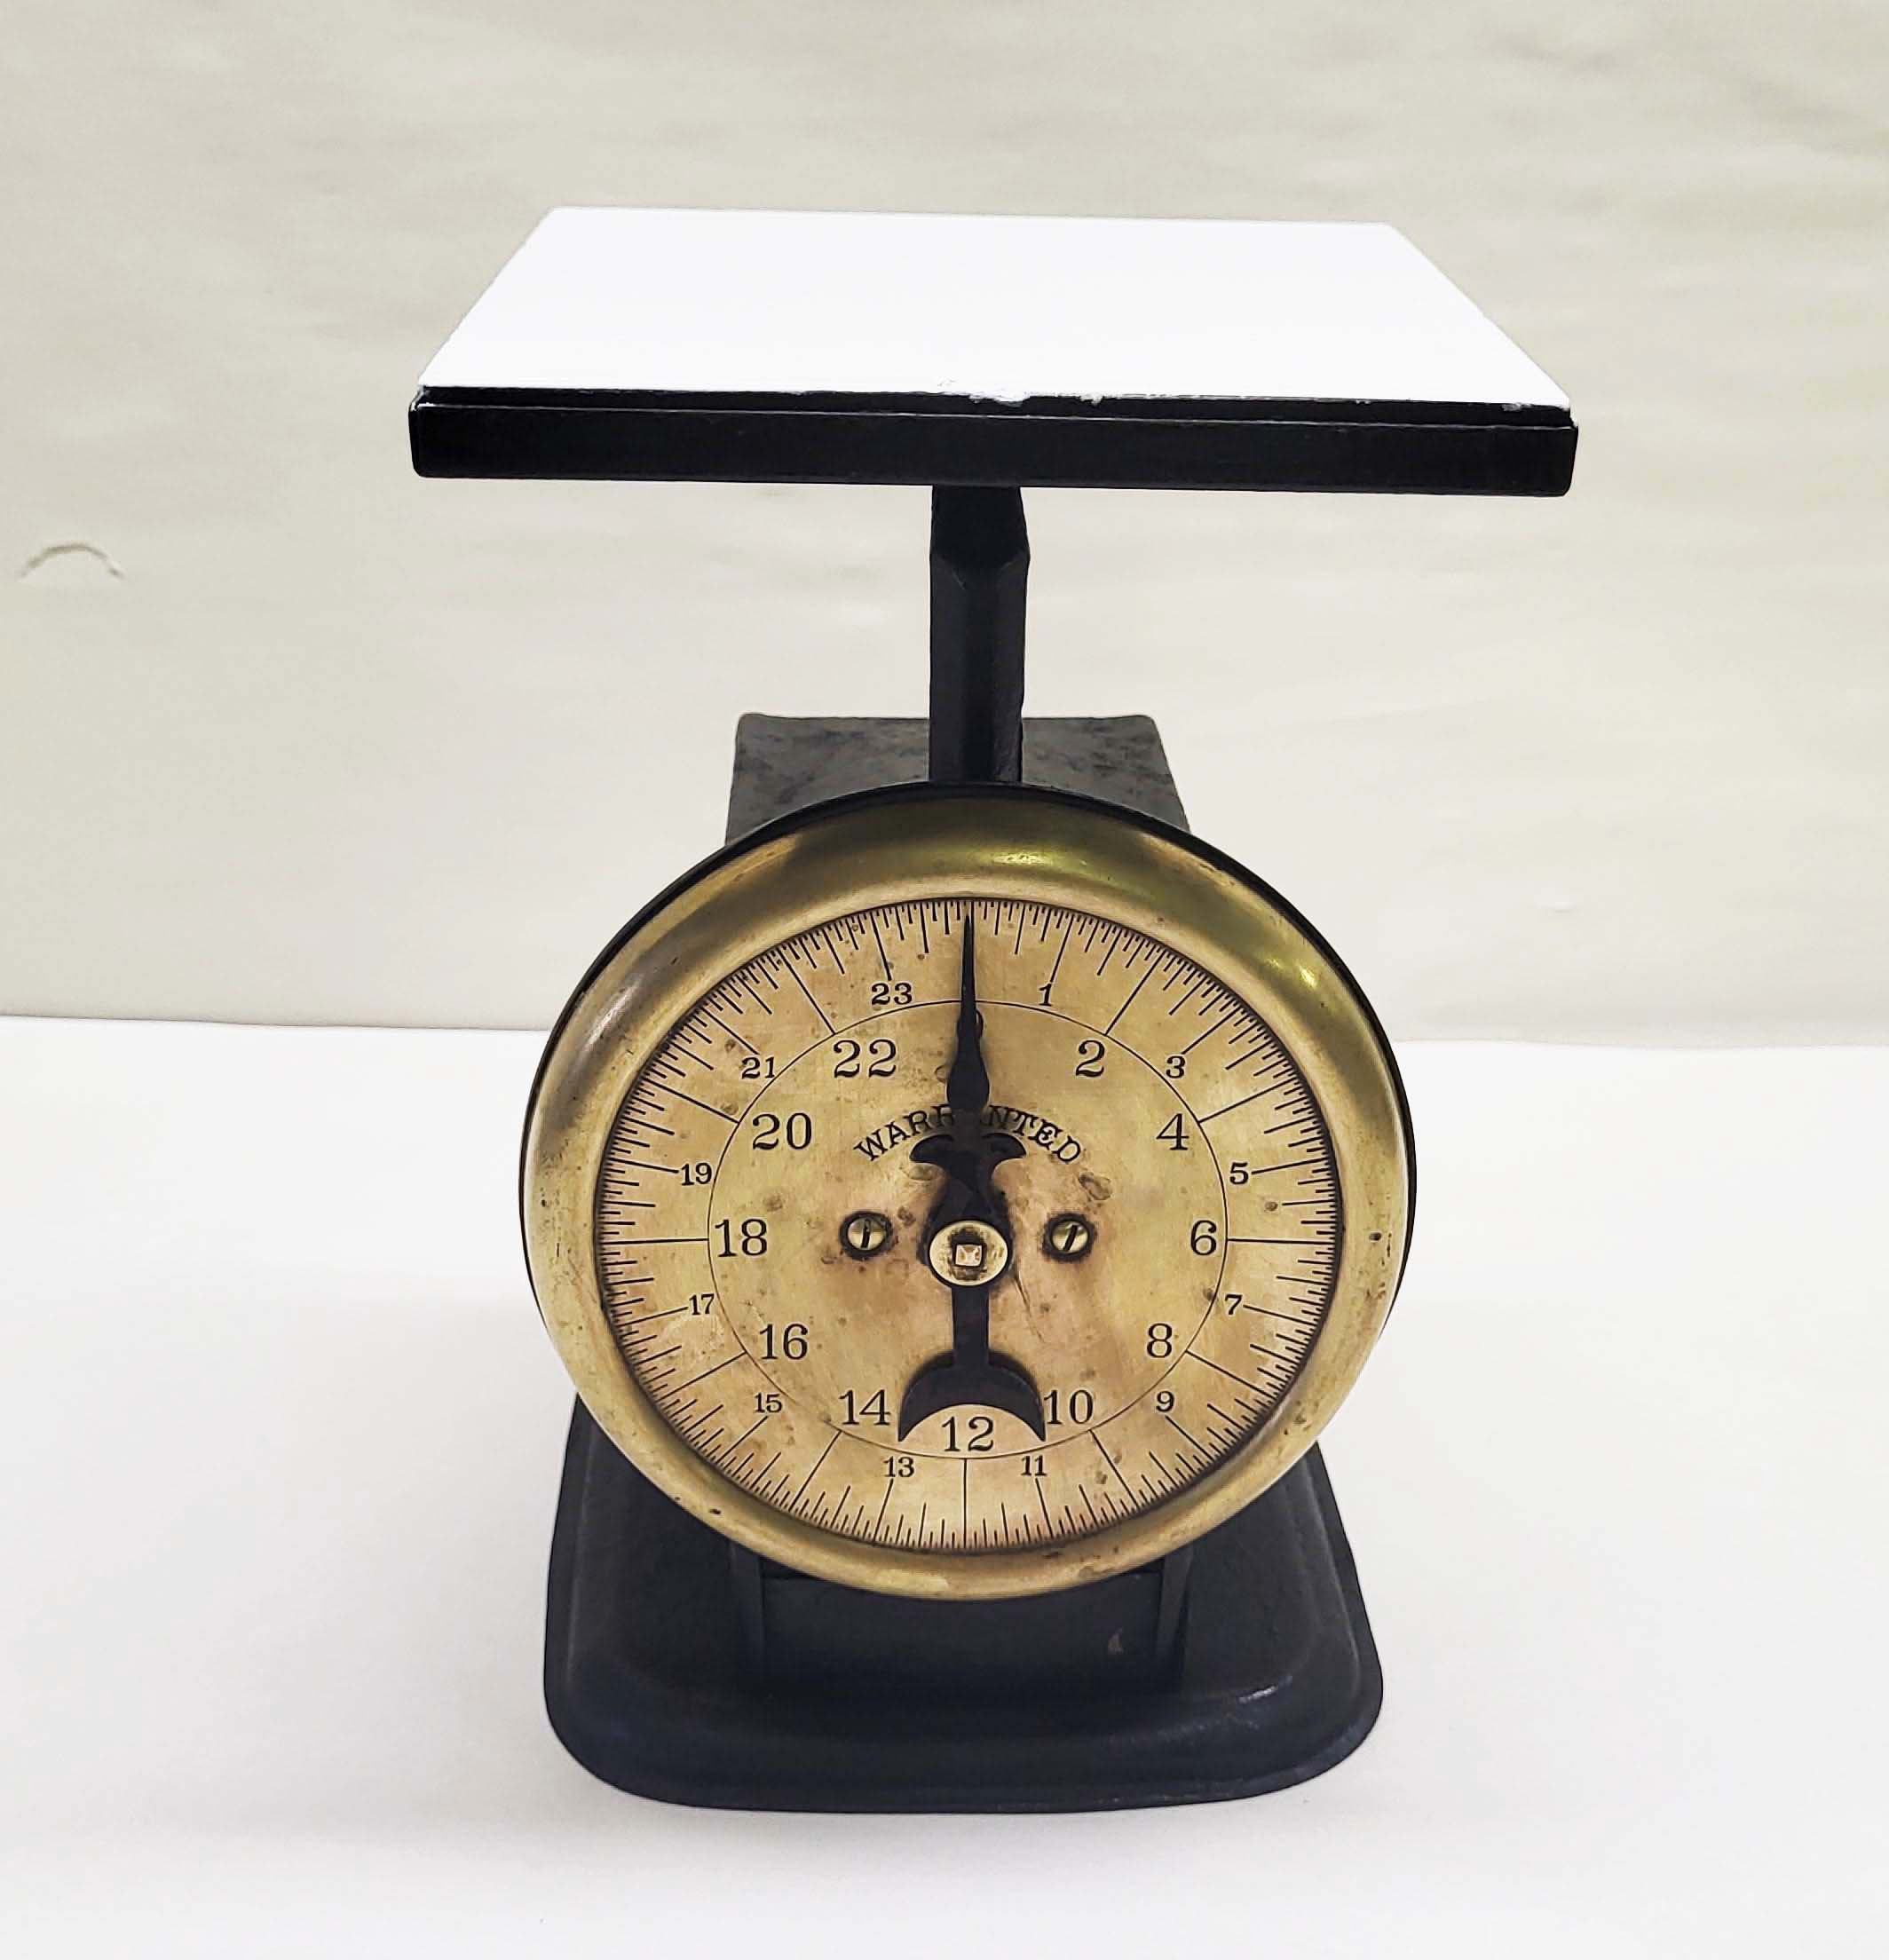 BRASS FACE WARRENTED GROCERY SCALE